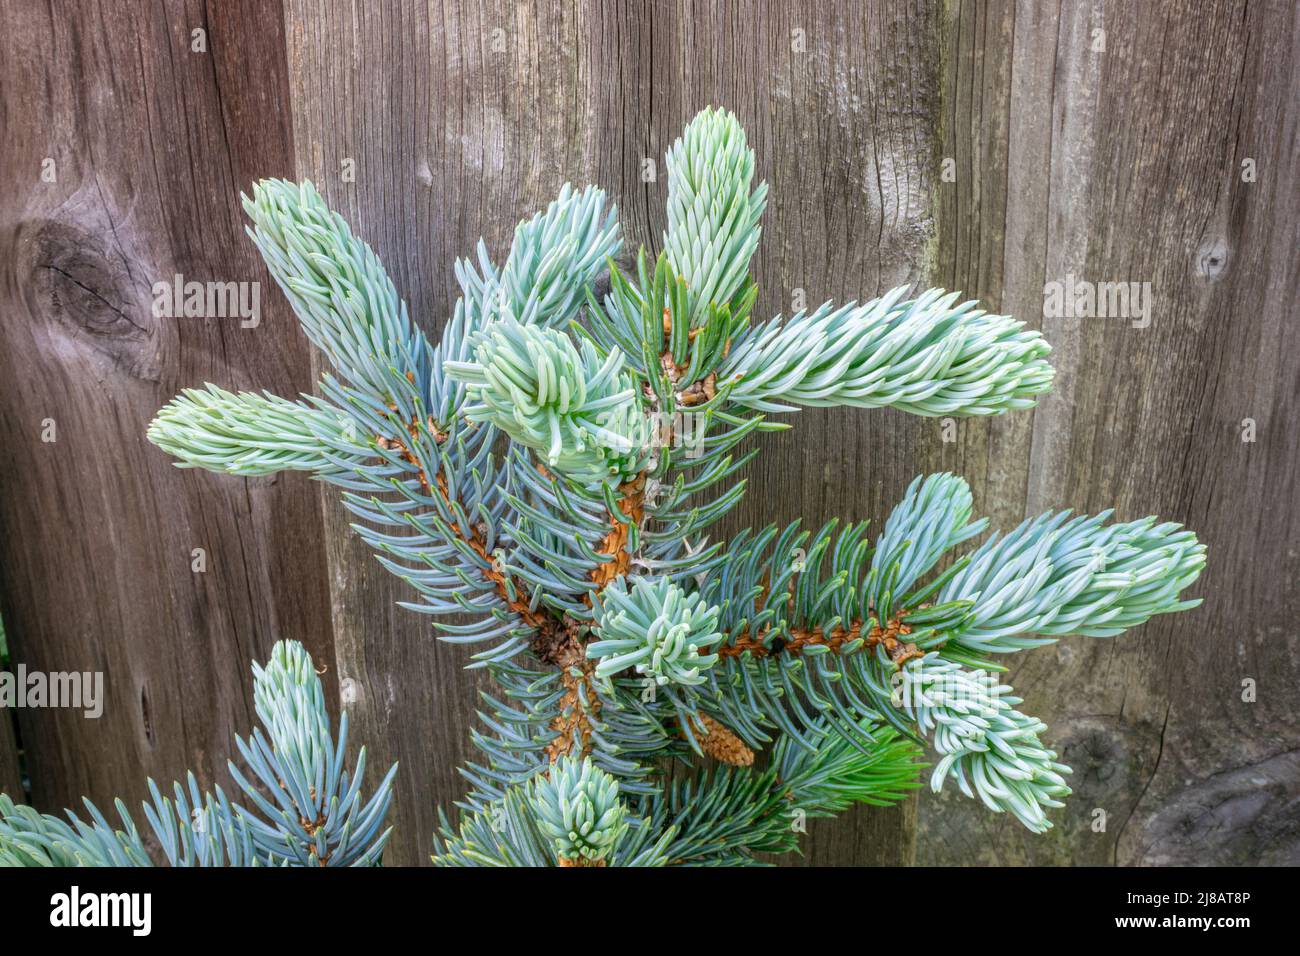 Beautiful new young shoots of blue spruce (Picea pungens glauca) against a wooden background Stock Photo